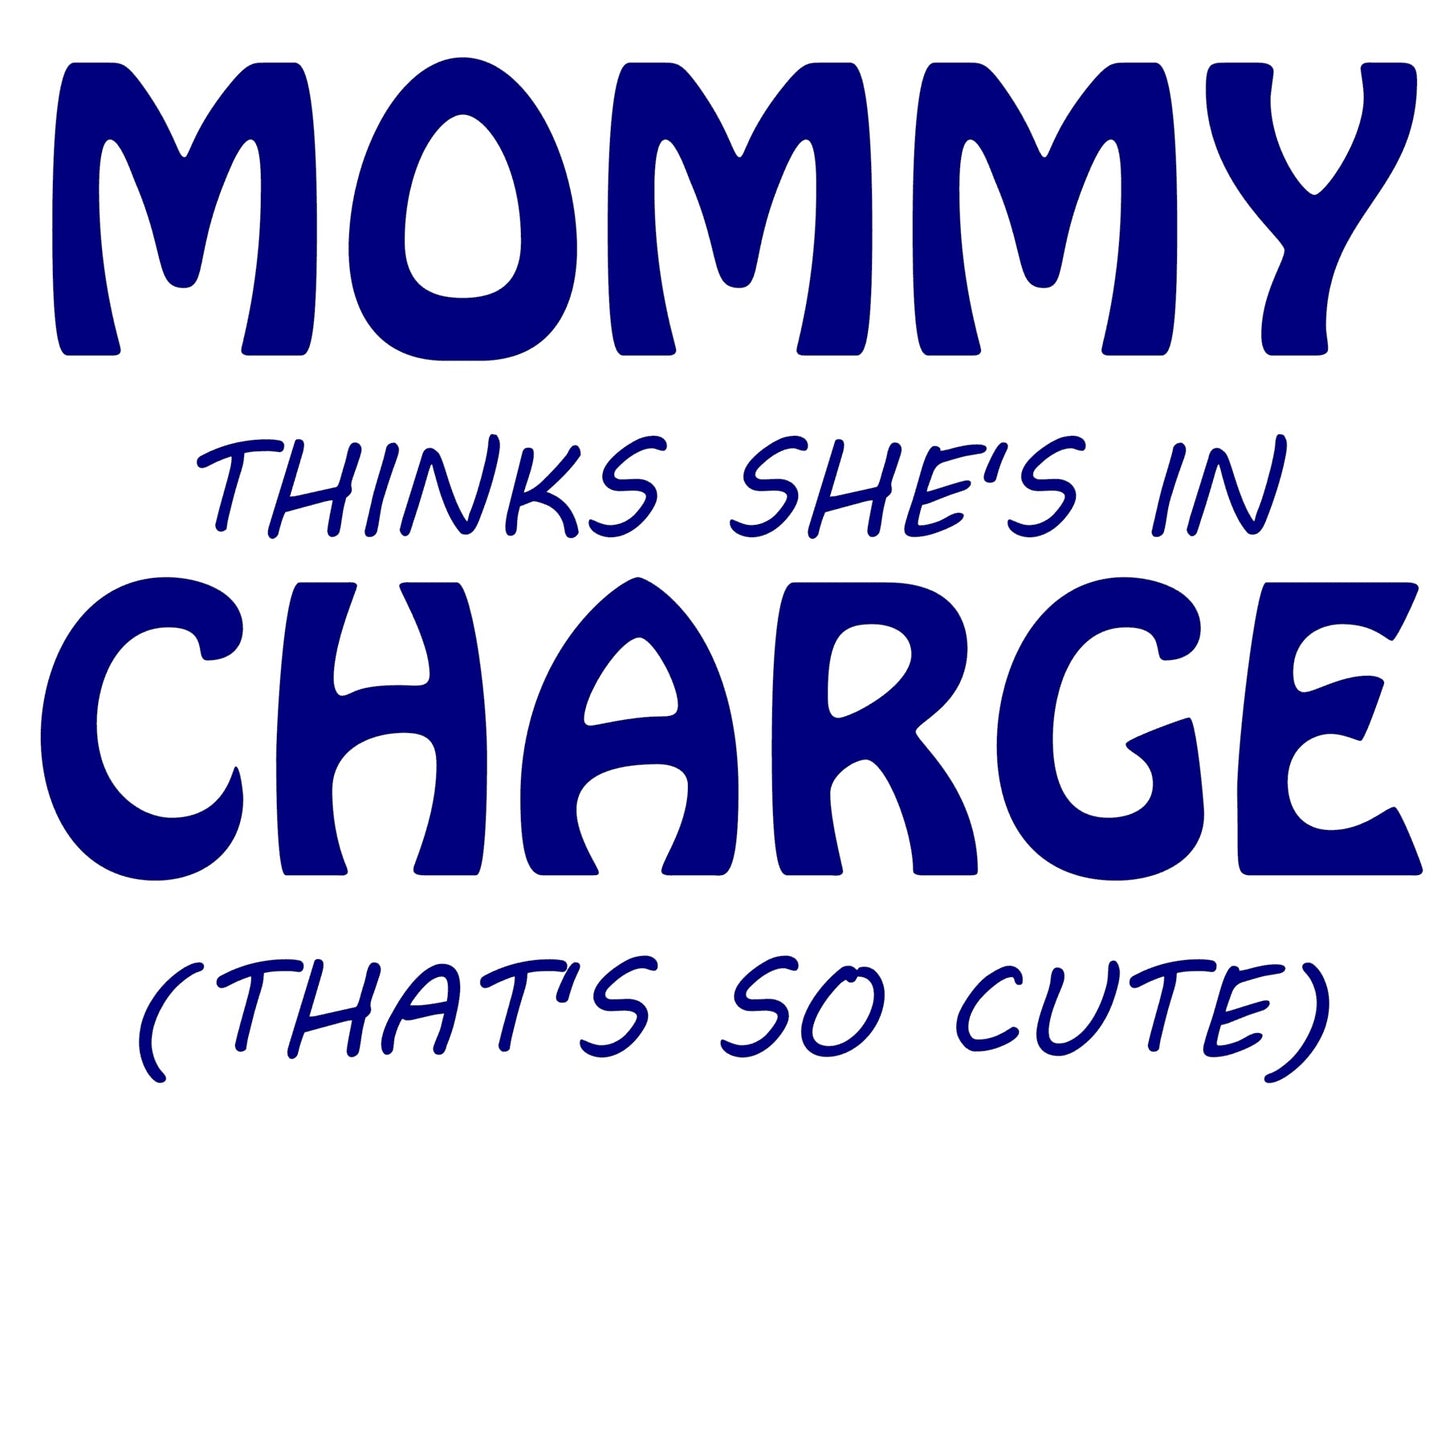 Mommy Thinks She's In Charge (That's So Cute)